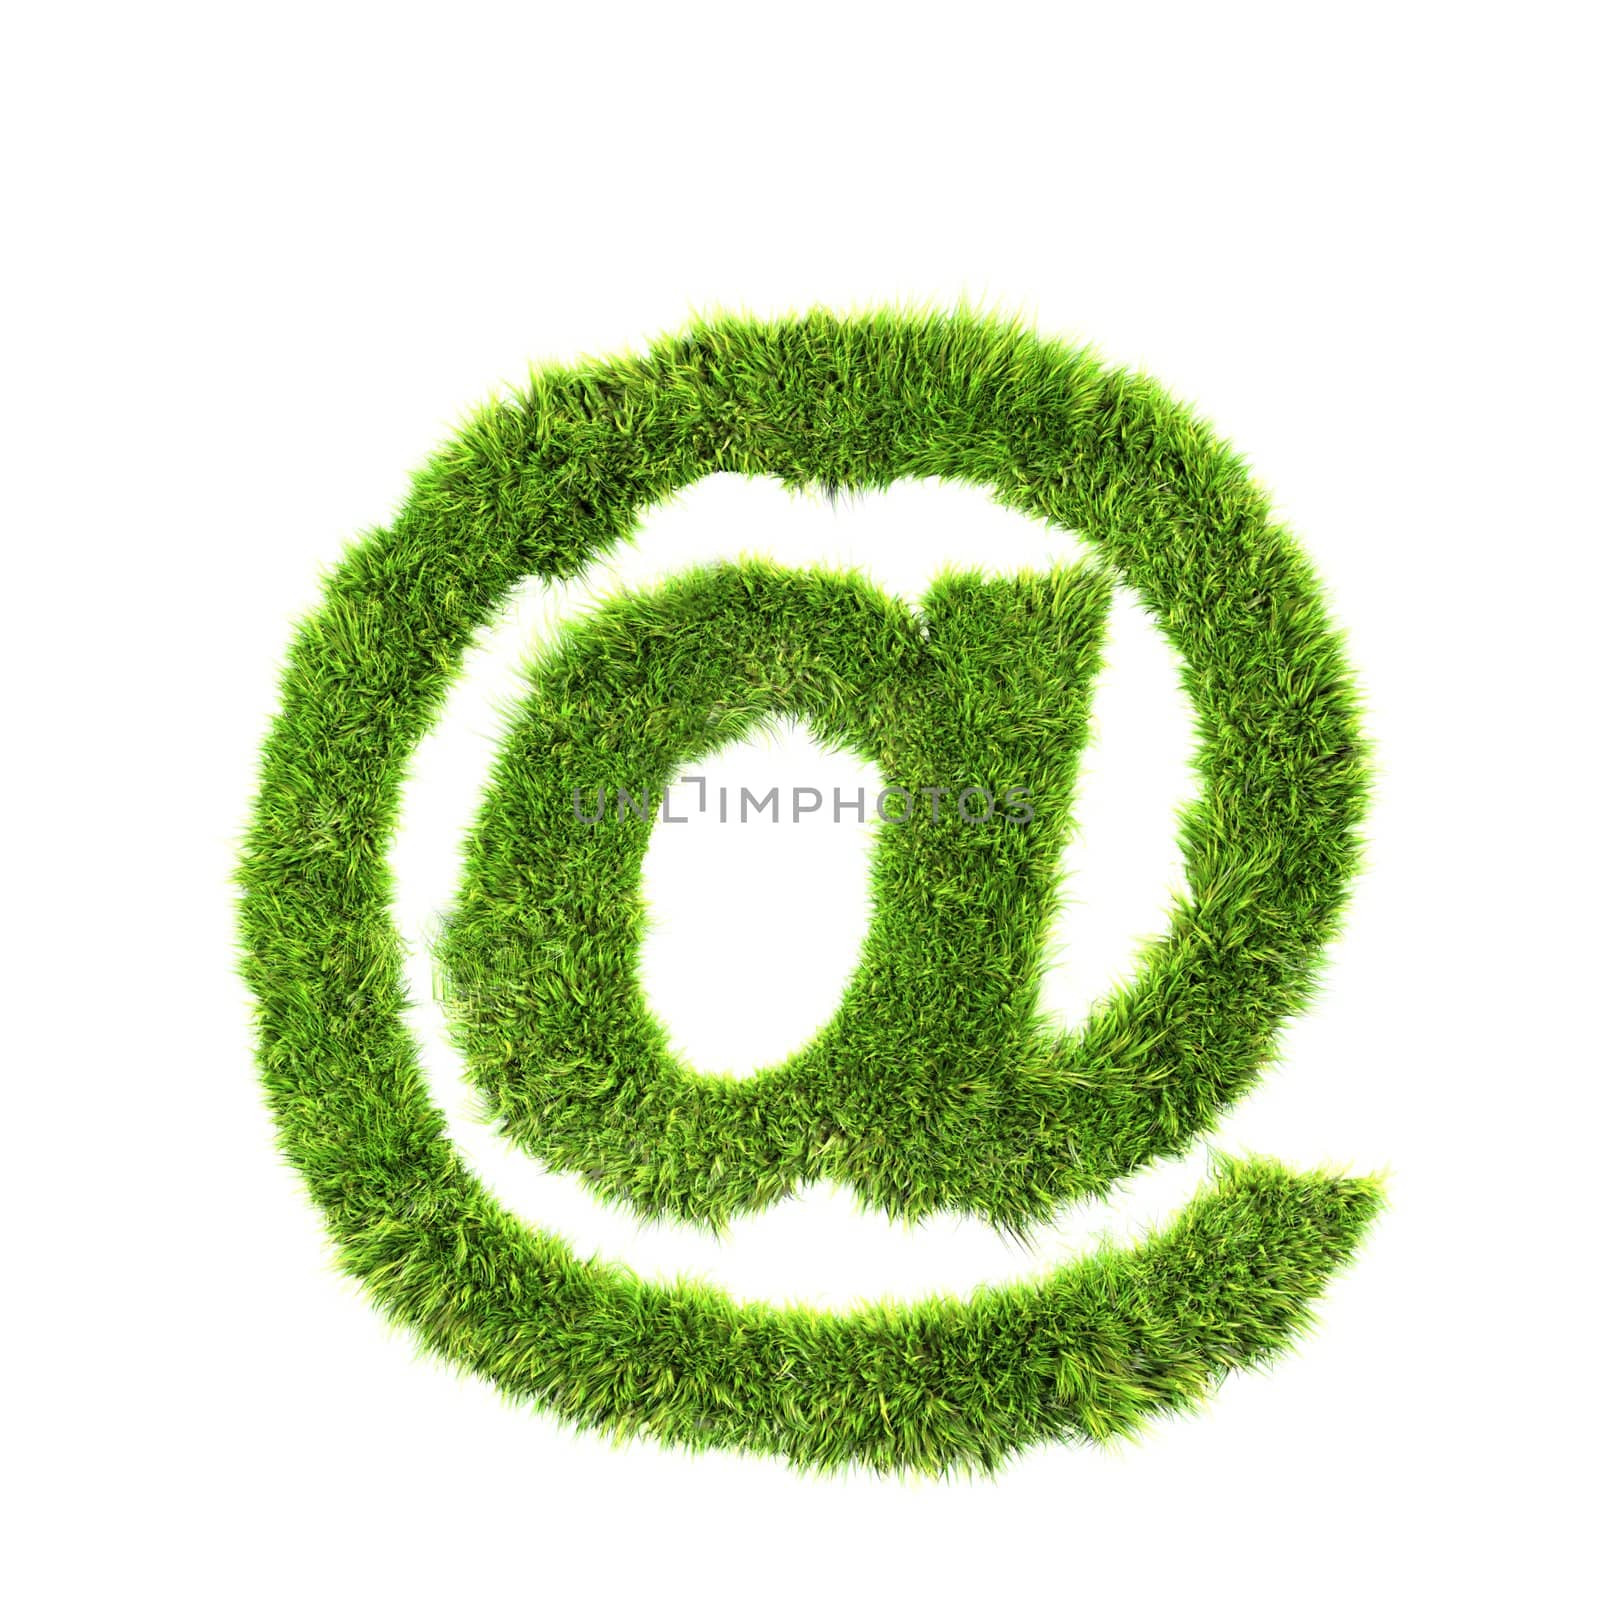 3d grass sign isolated on white background - arobas by chrisroll